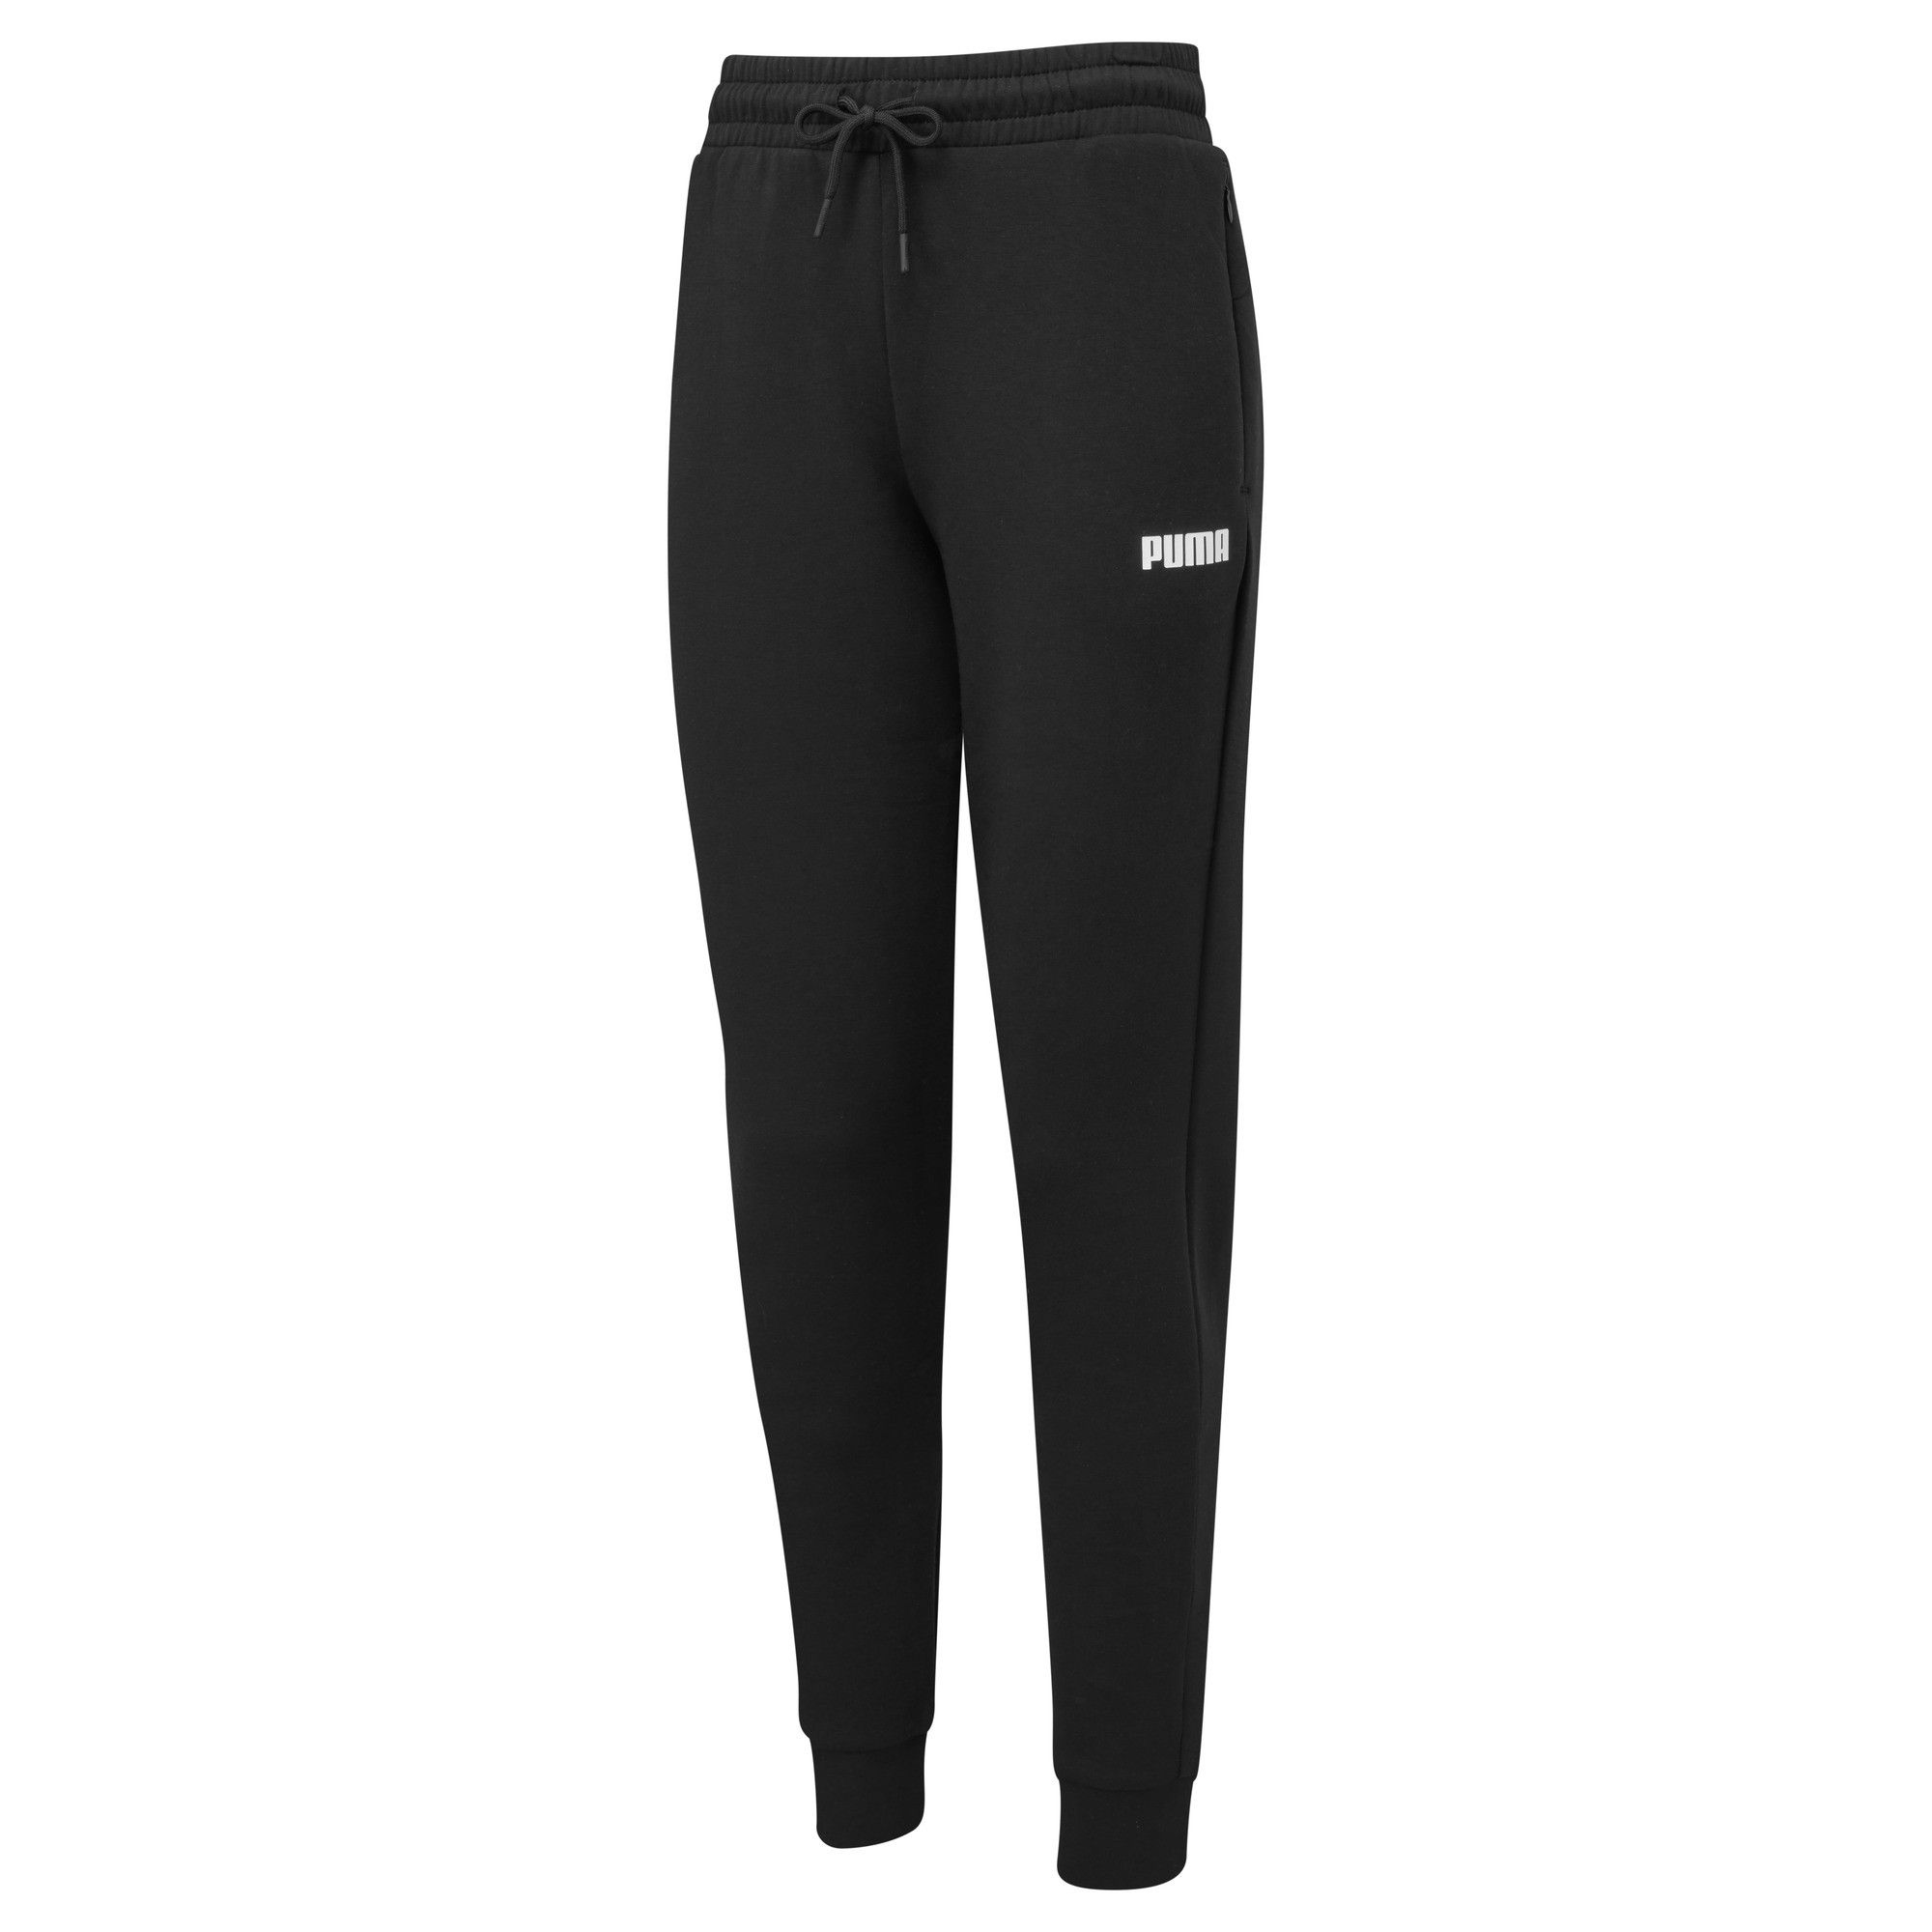  Perfect for relaxing at home or heading out, the SPACER Pants will keep you dry and fresh, thanks to their moisture-wicking material. DETAILS Slim fit. Comfortable style by PUMA. PUMA branding details. Signature PUMA design elements.